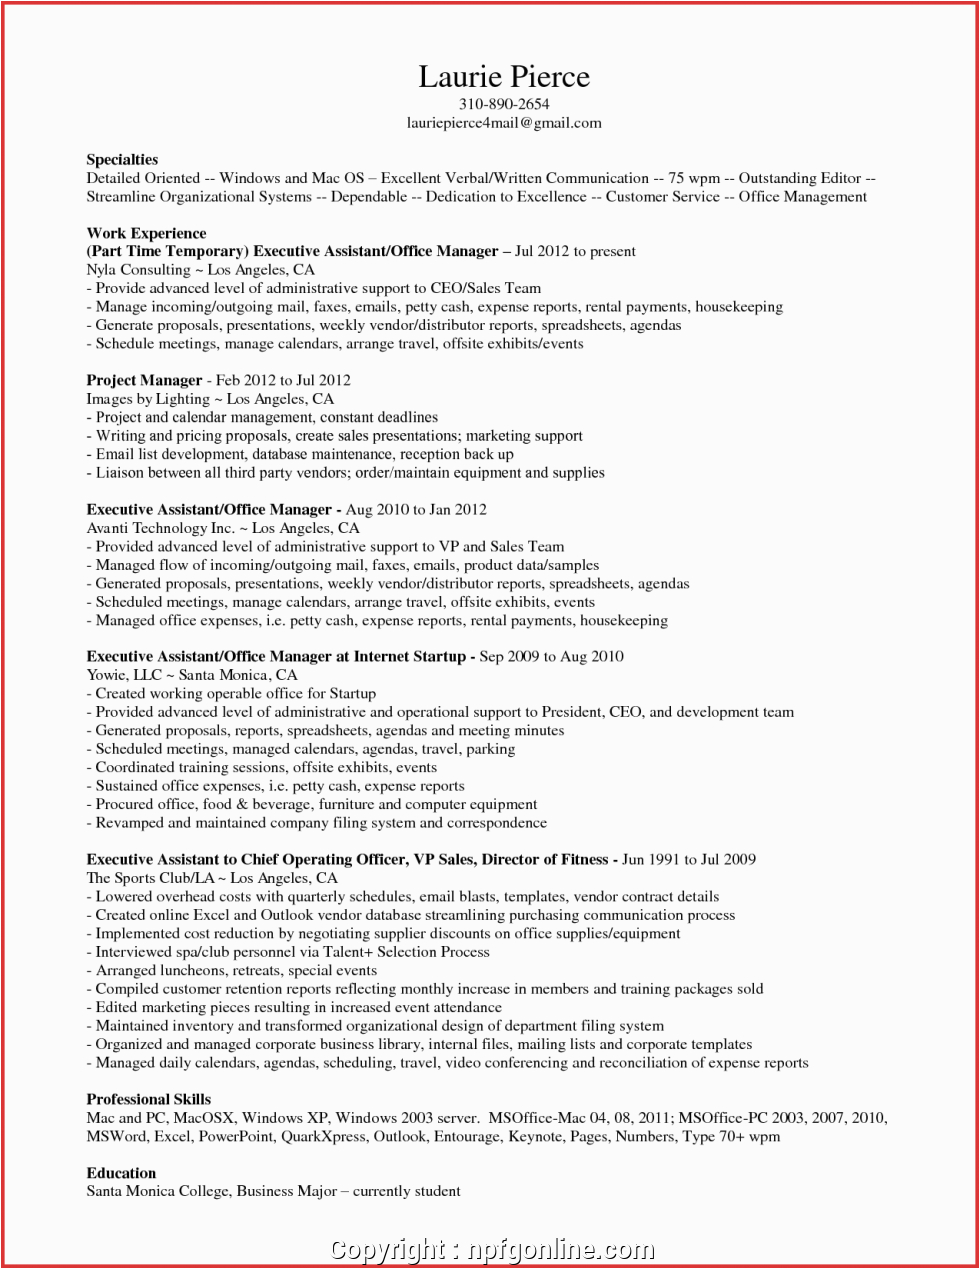 Sample Resume for Administrative assistant Office Manager New Sample Resume Executive assistant Fice Manager New